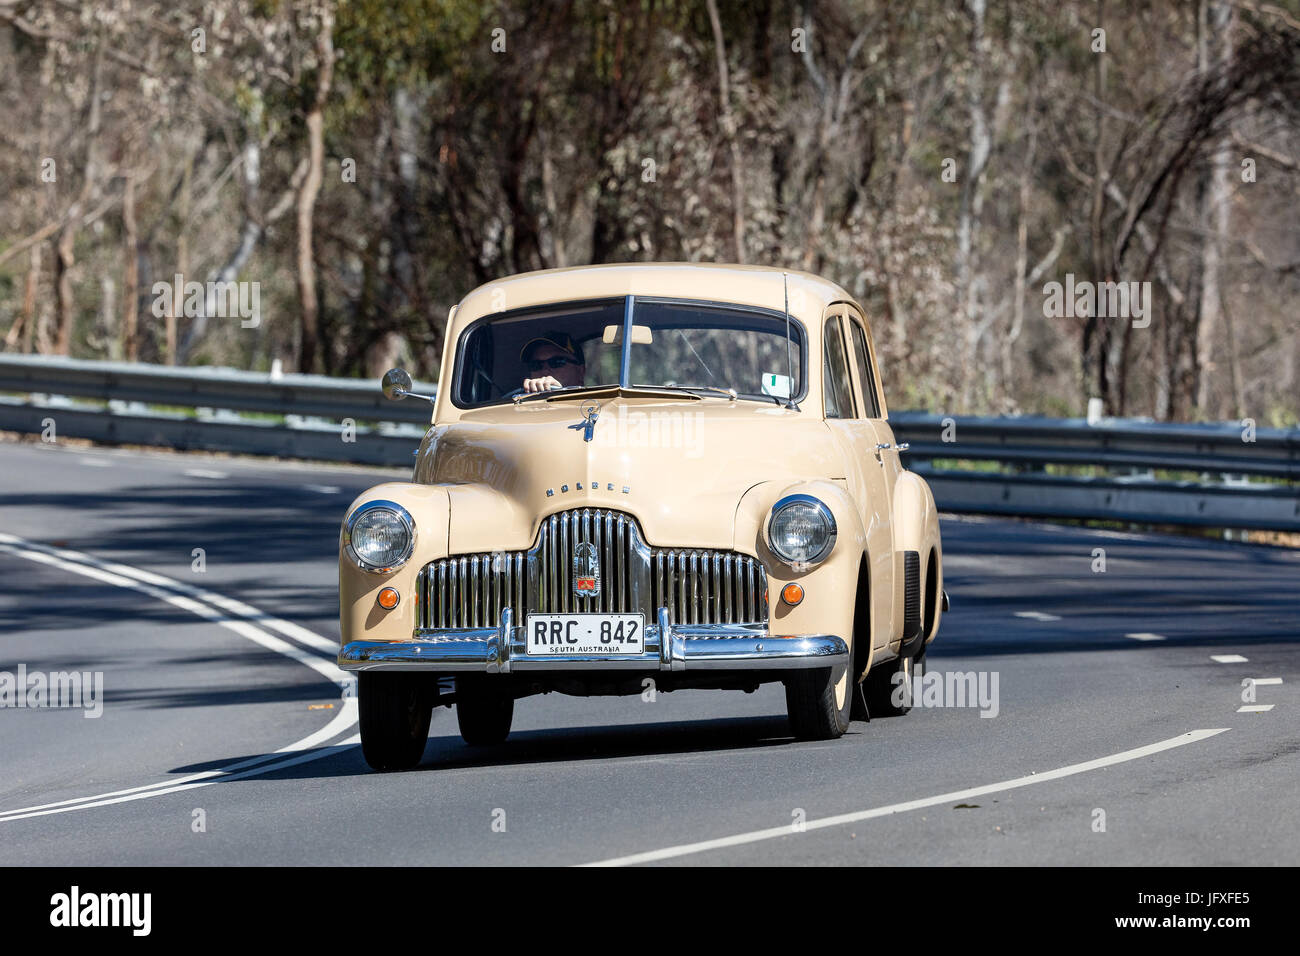 Vintage Holden driving on country roads near the town of Birdwood, South Australia. Stock Photo